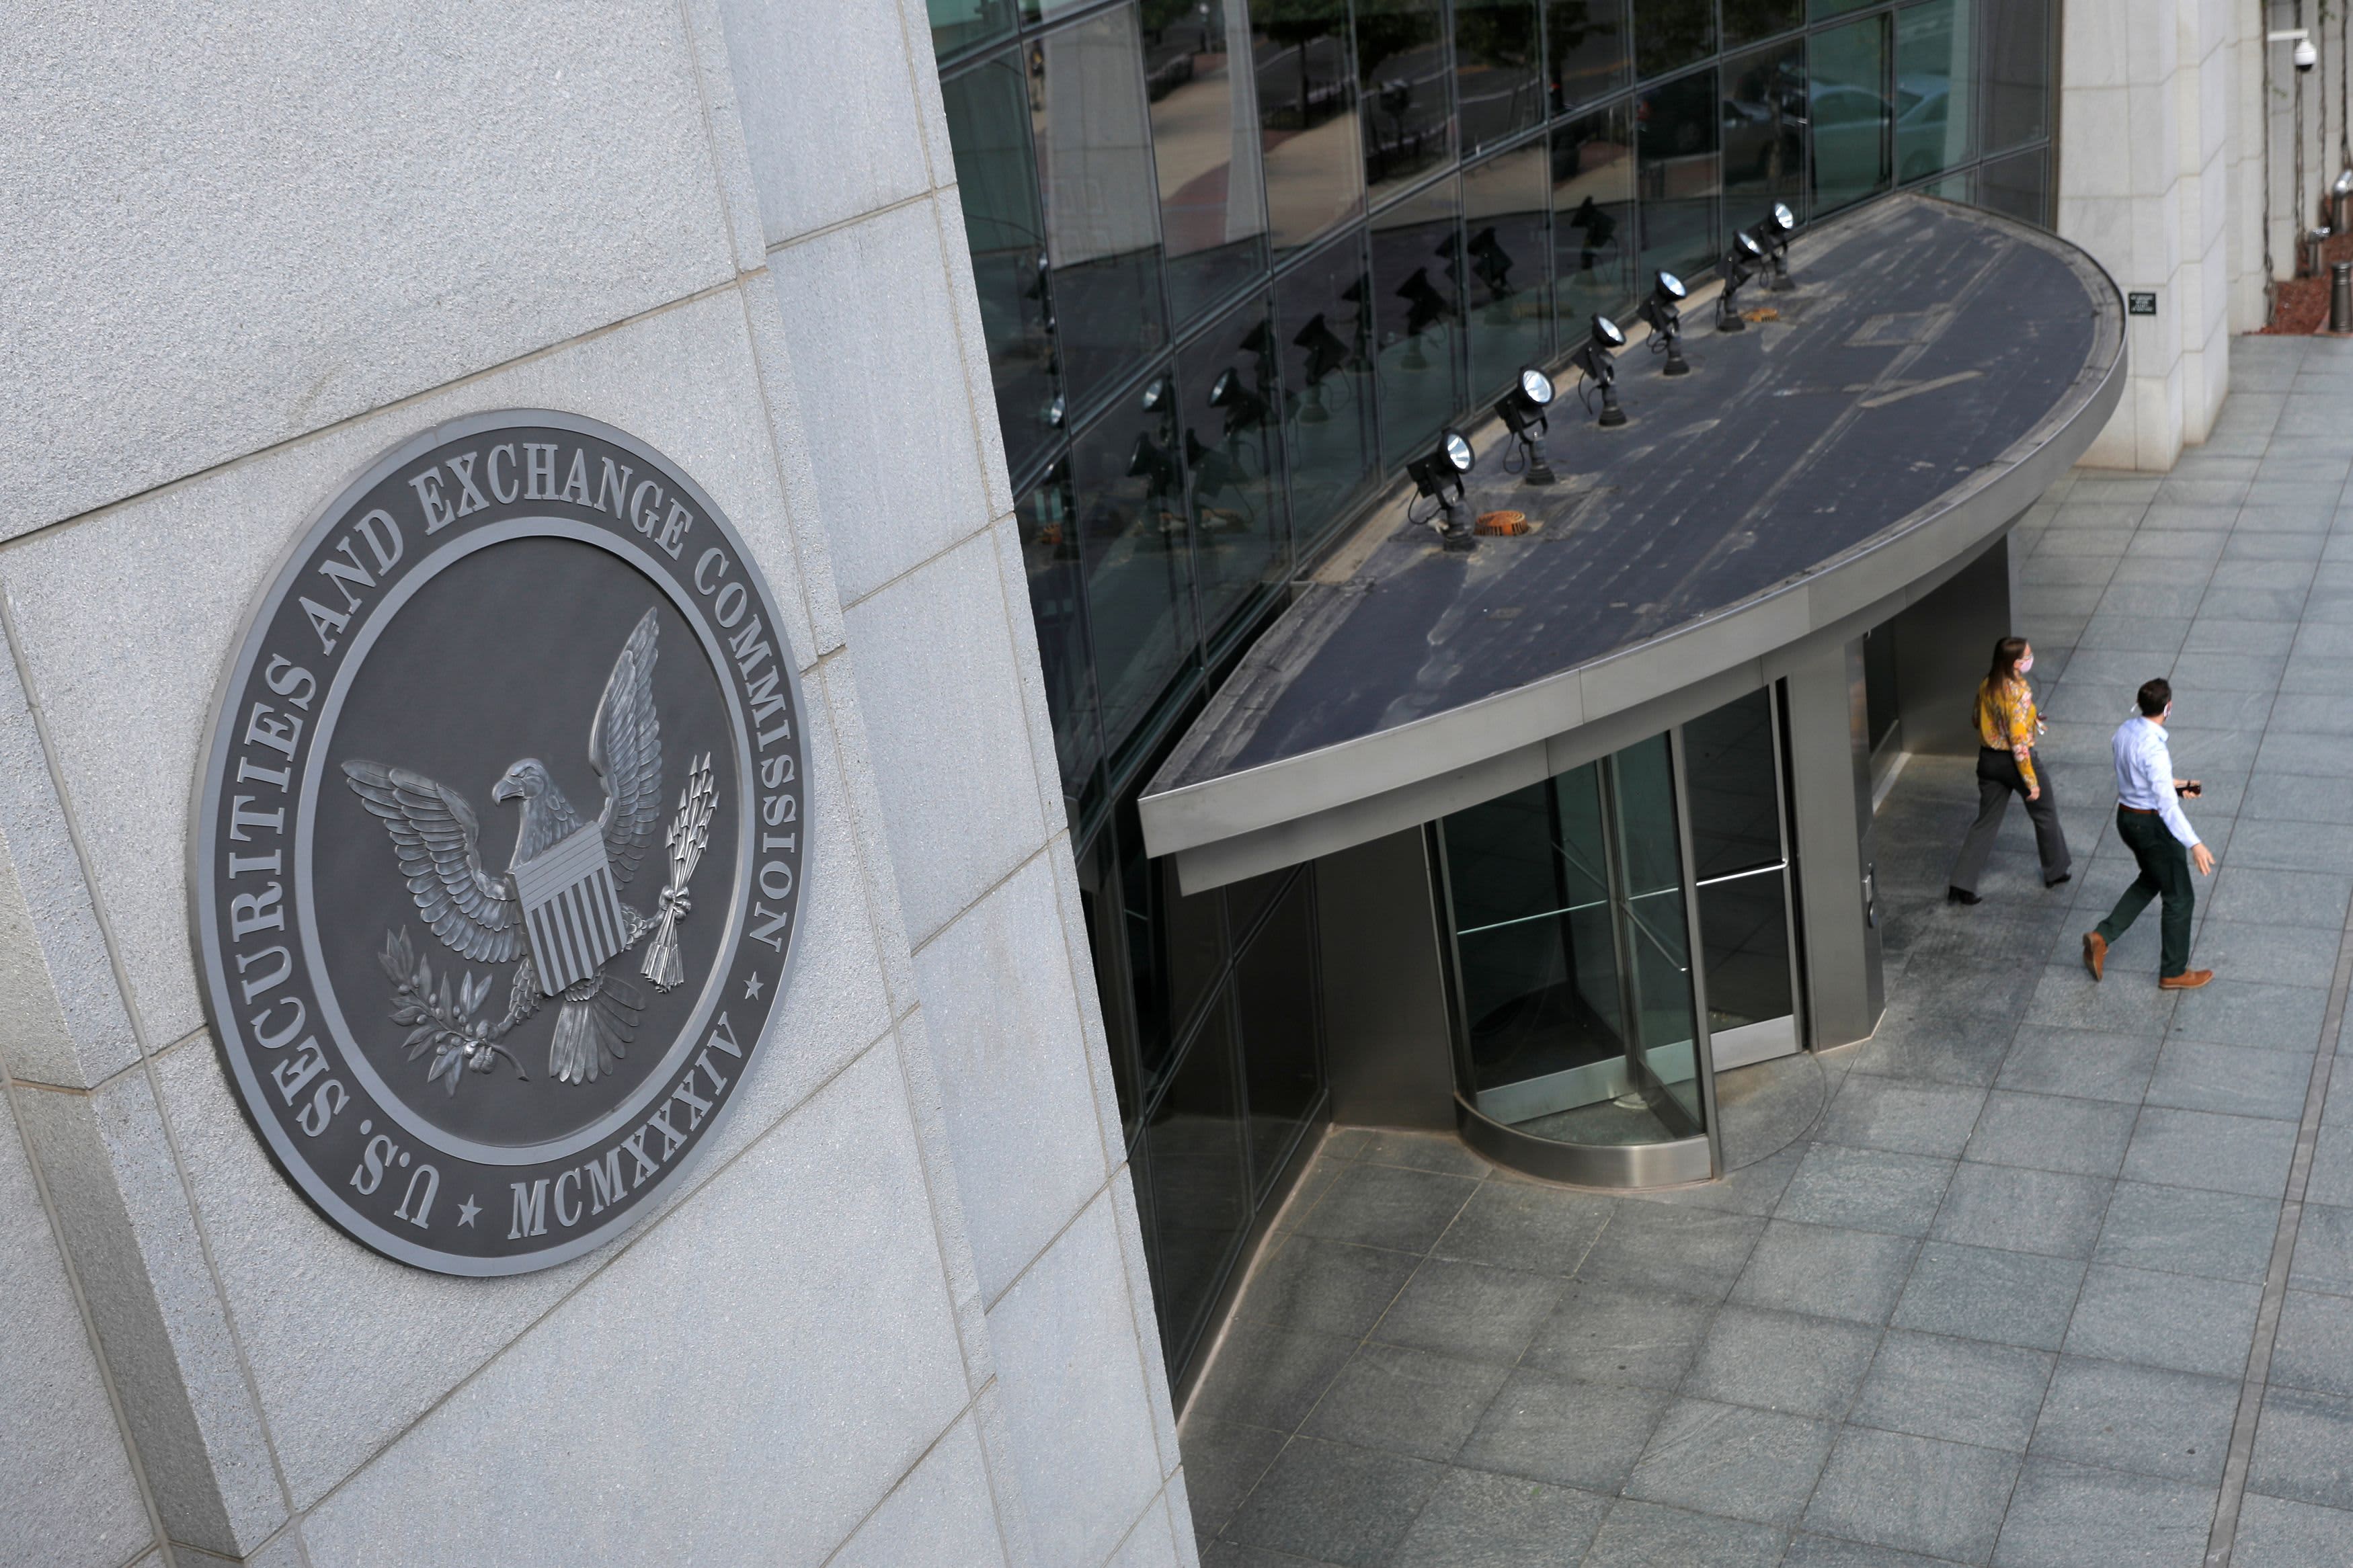 Covington & Burling was hacked, the SEC is now suing the DC law firm